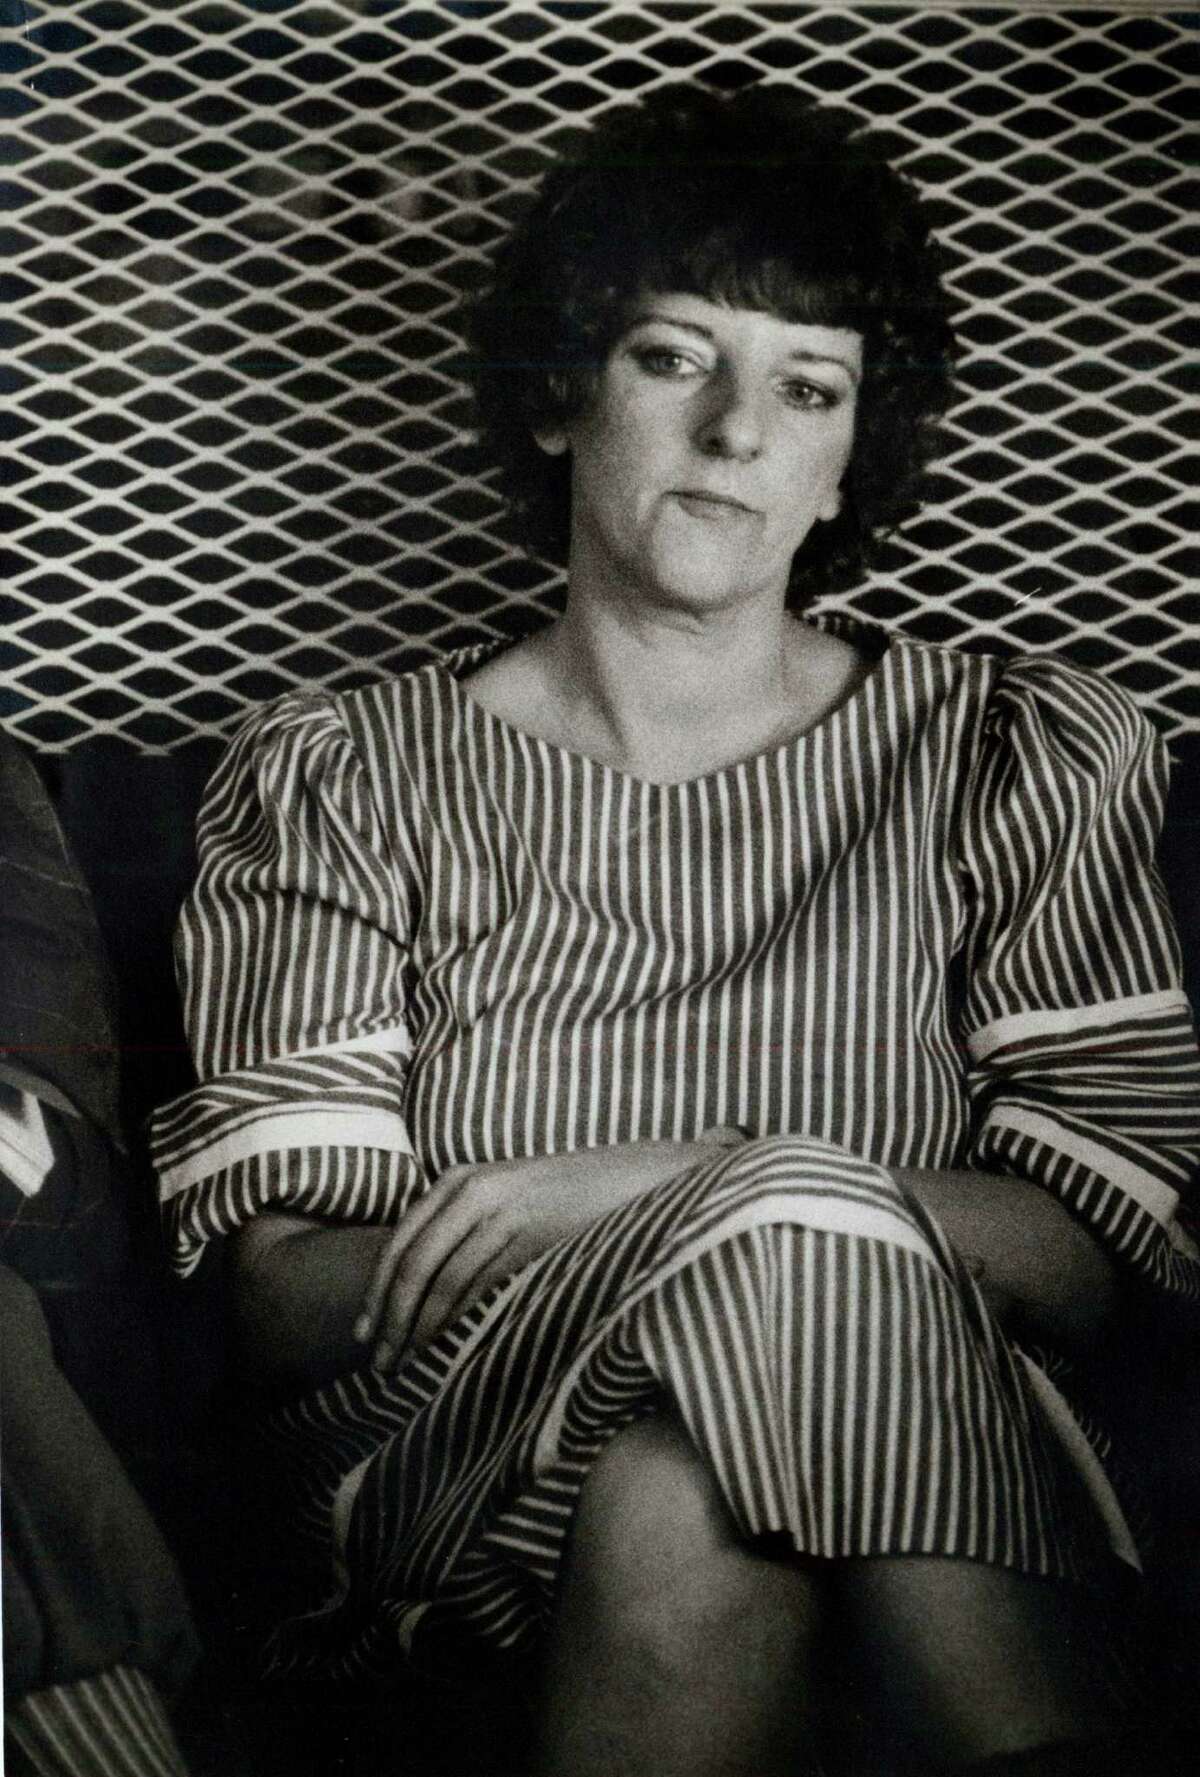 1. Former nurse Genene Jones was sentenced in 1984 to life in prison for killing a 15-month-old child.